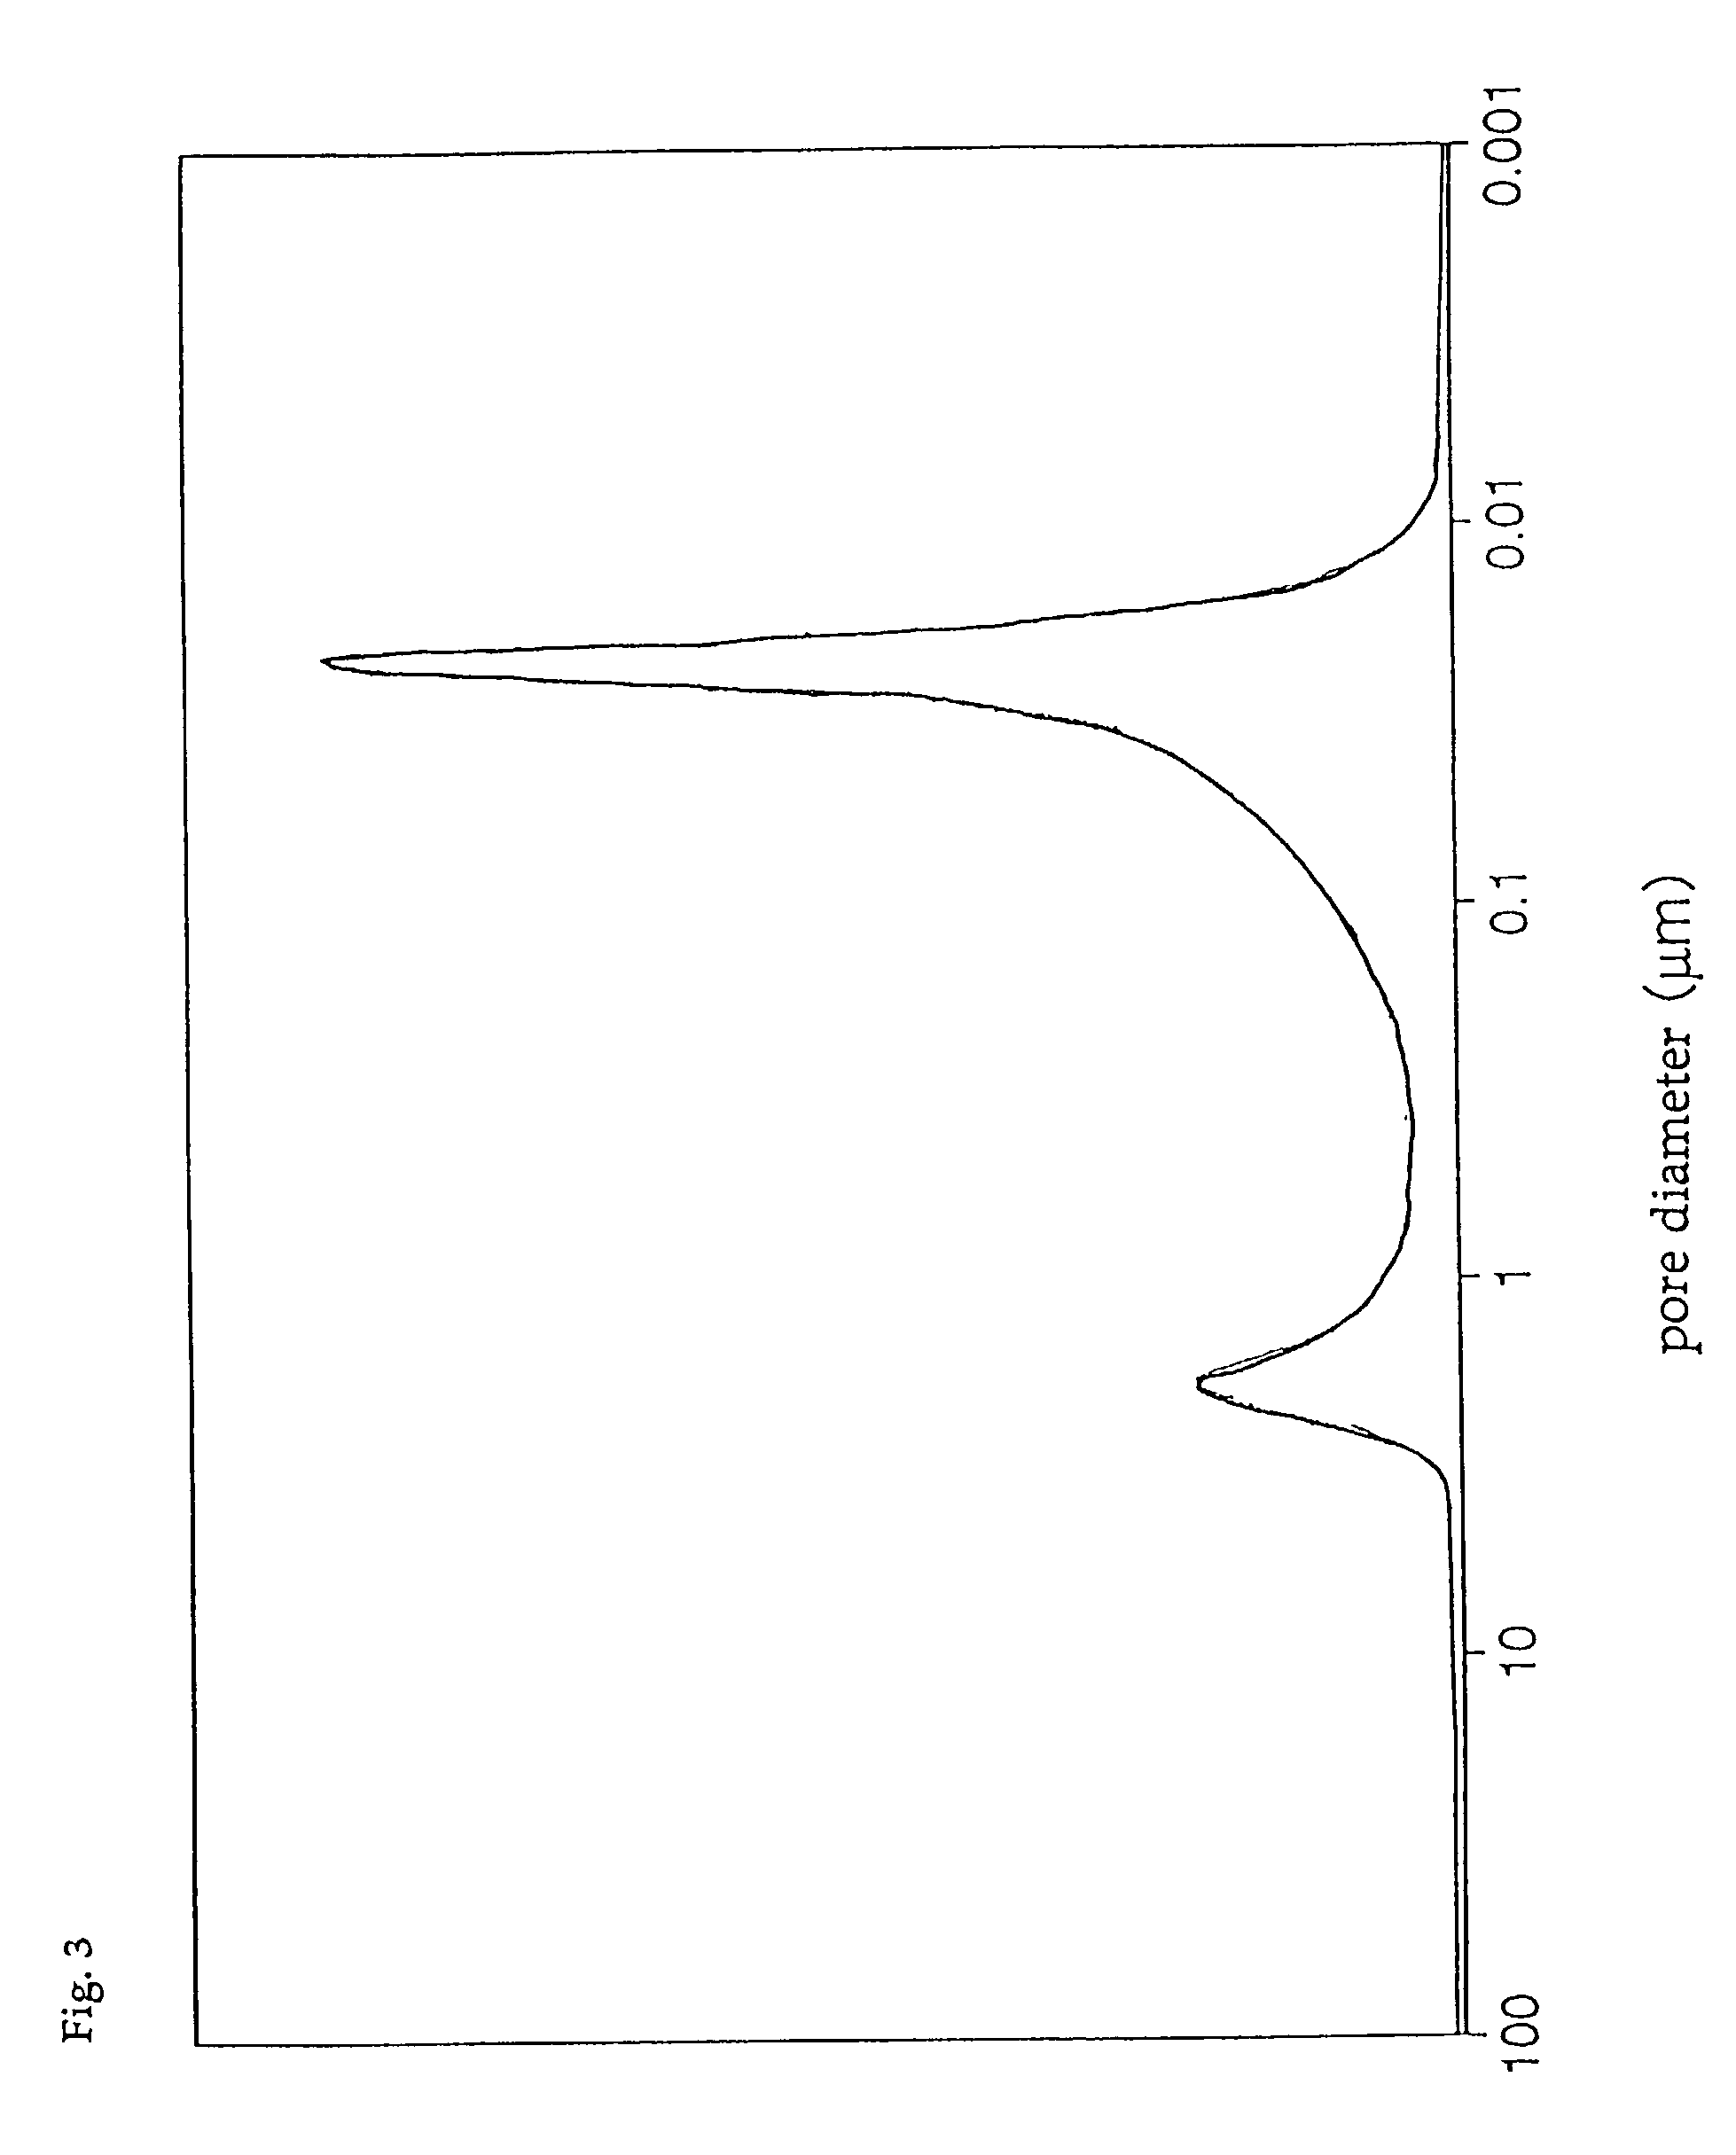 Catalyst and process for removing organohalogen compounds